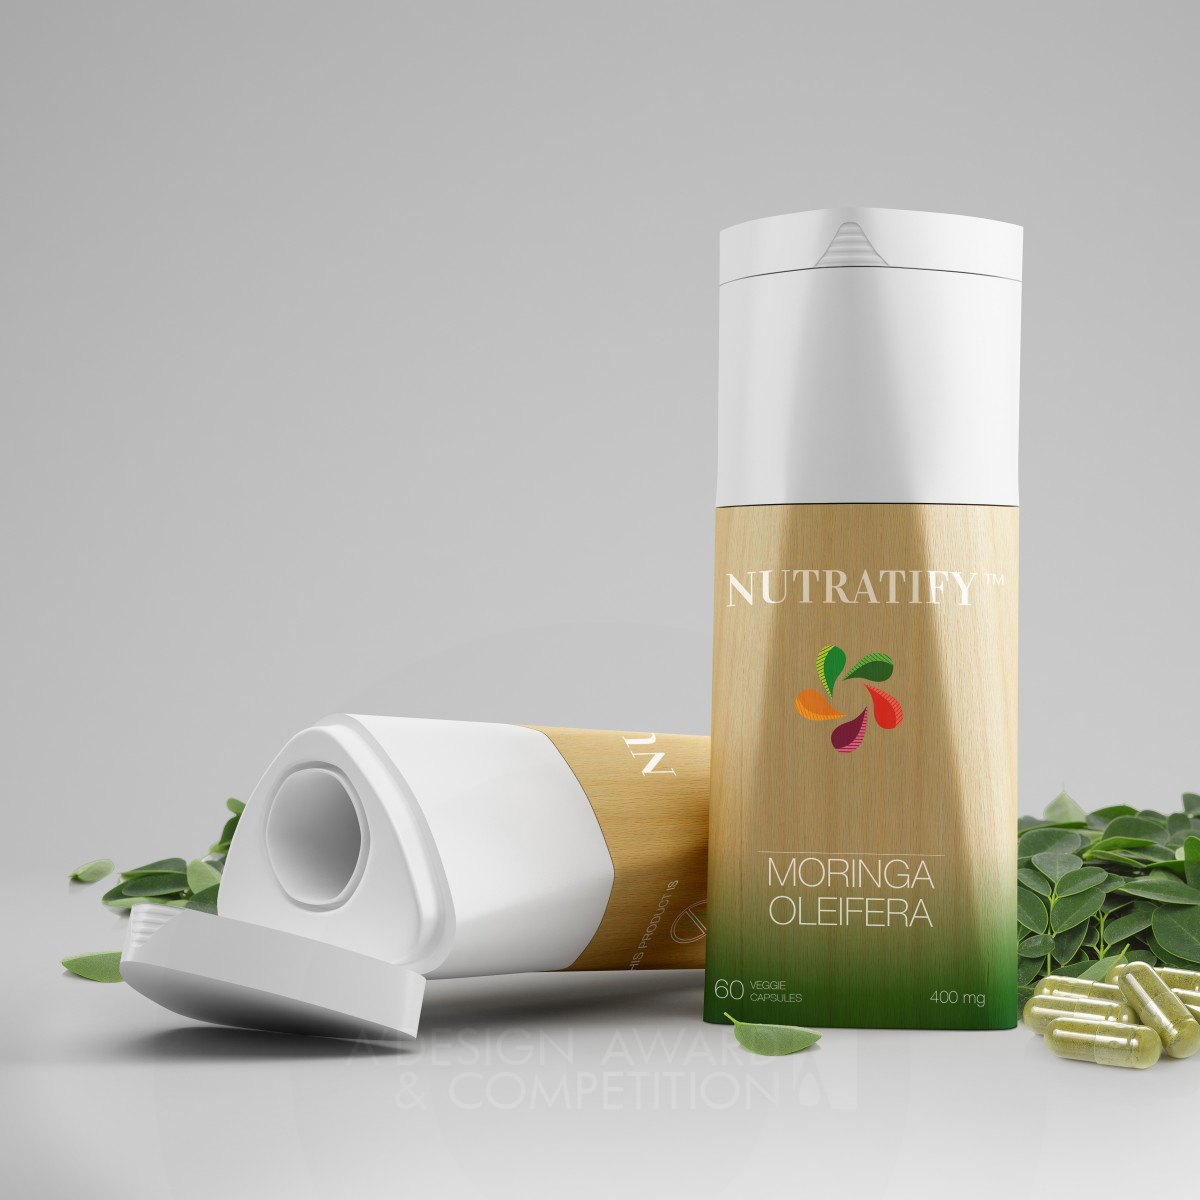 Nutratify packaging Capsules container by Max Bessone